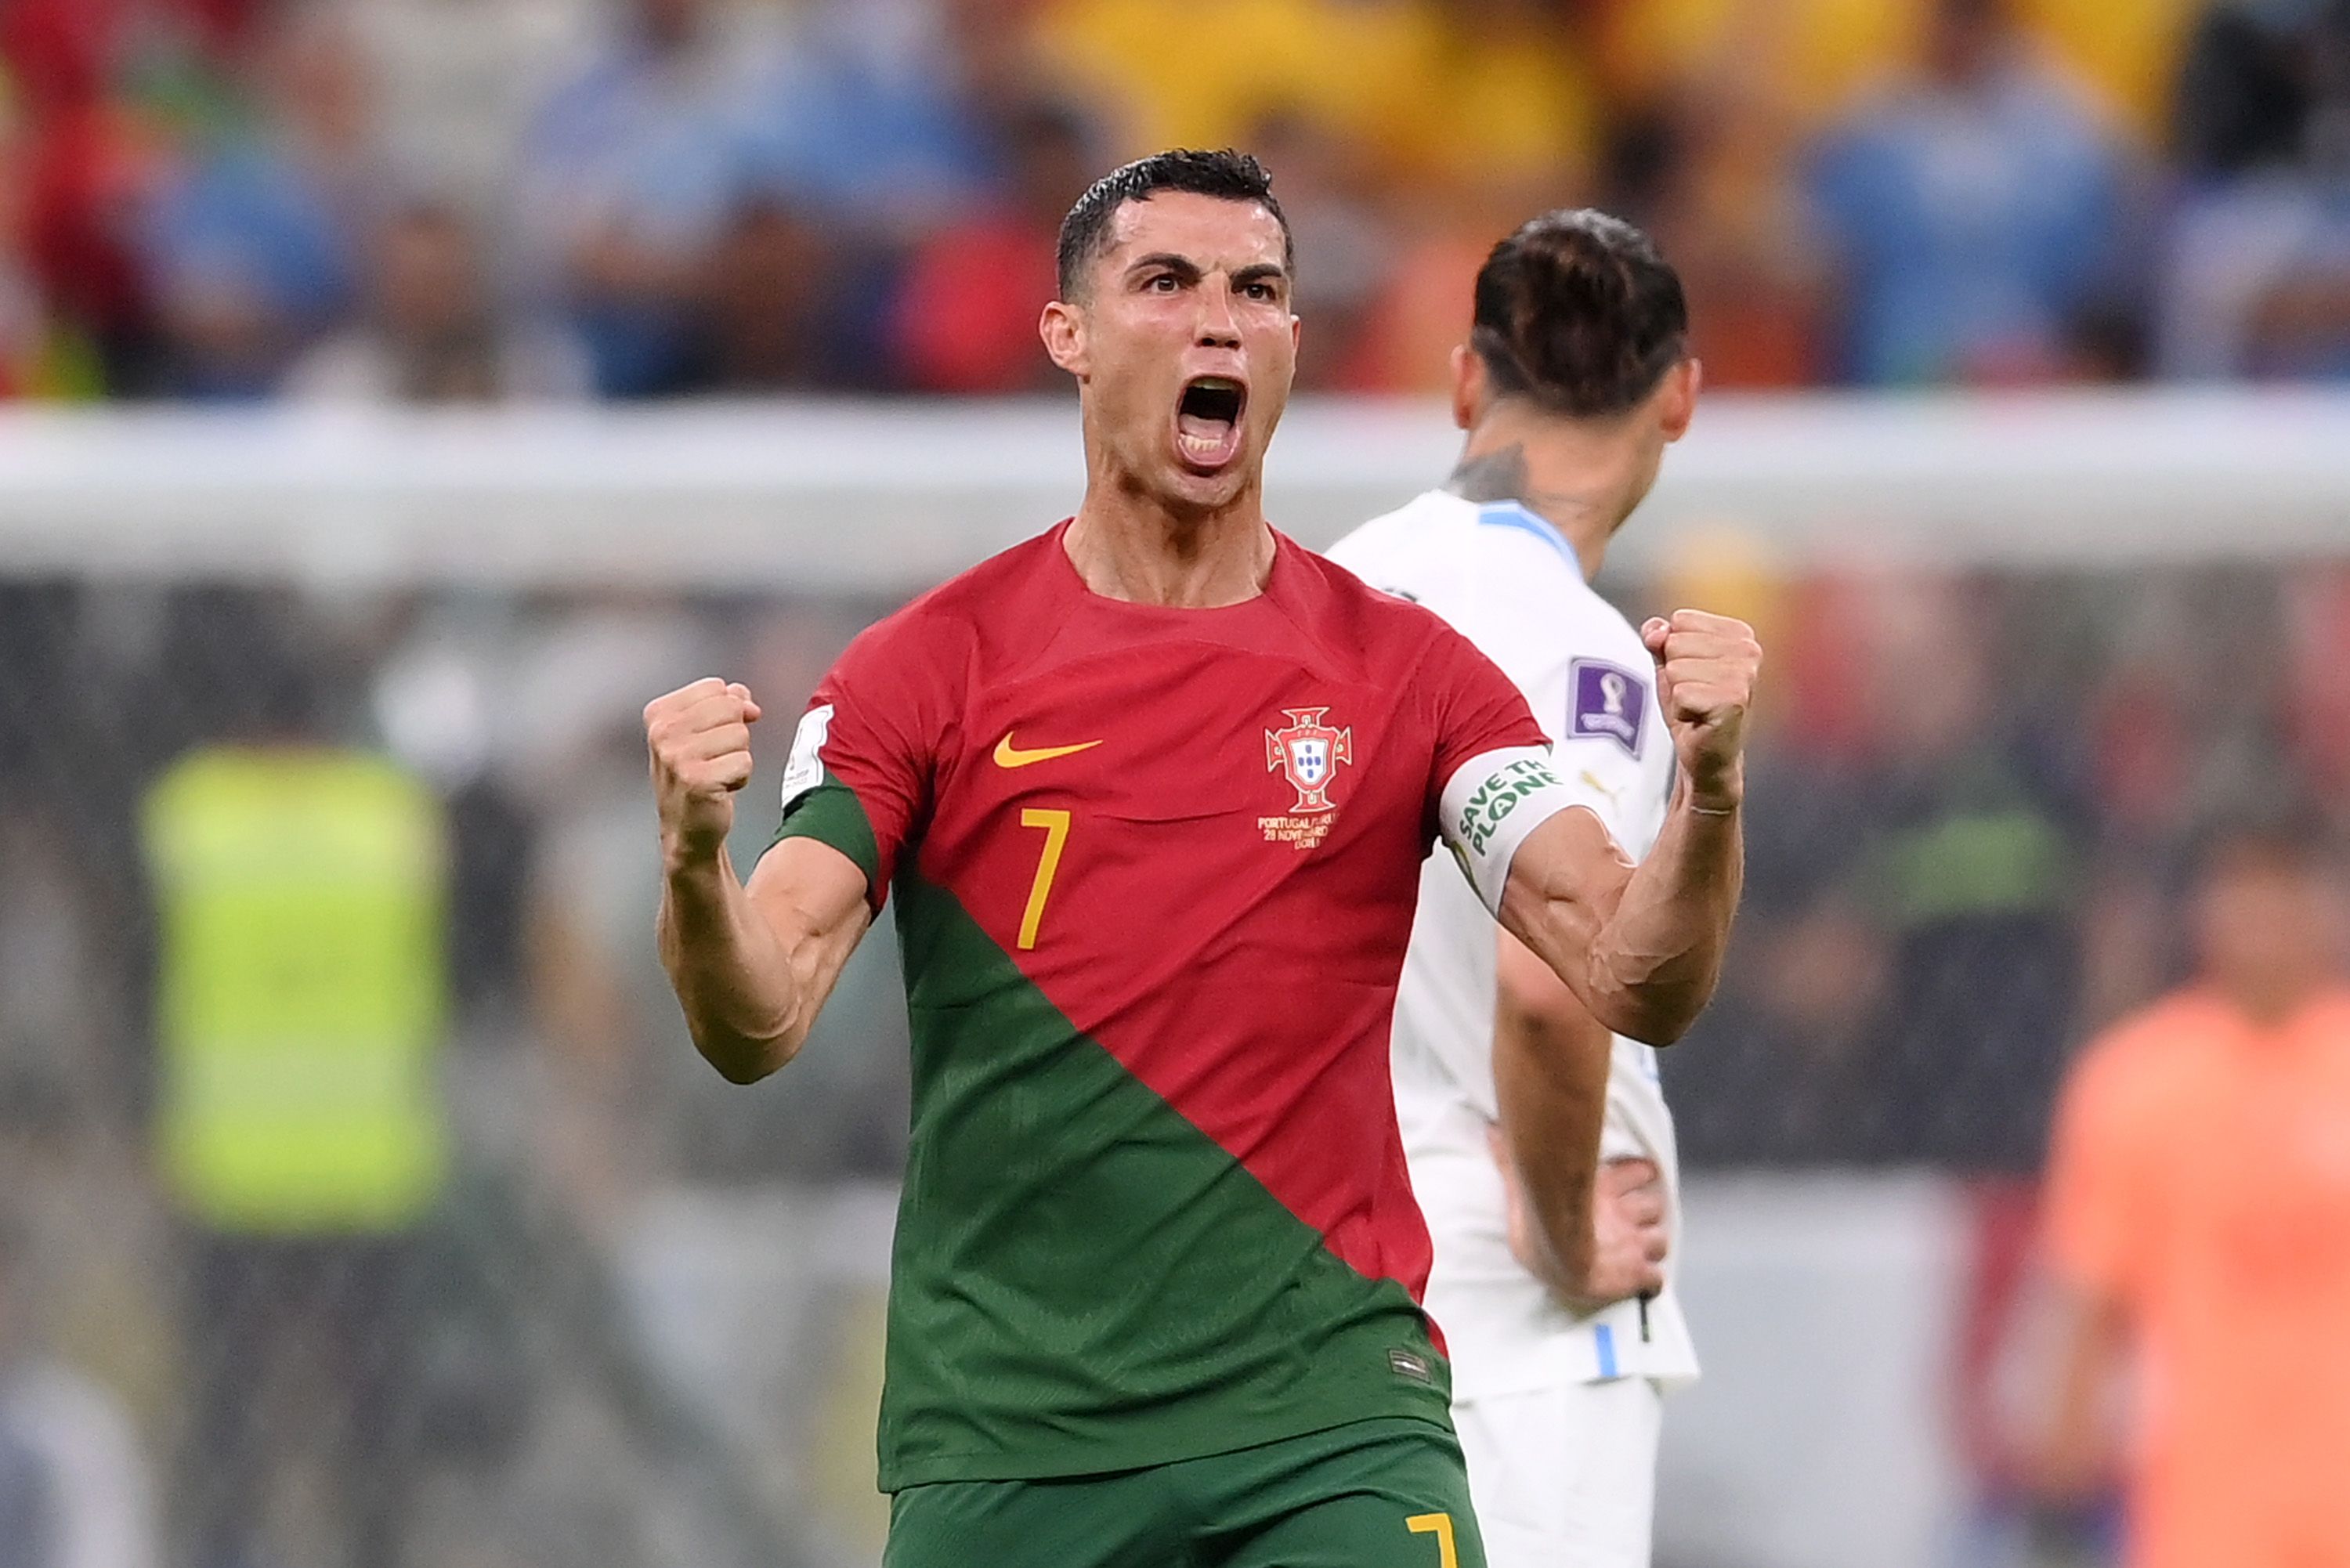 Cristiano Ronaldo's Portugal are tipped to reach the World Cup final